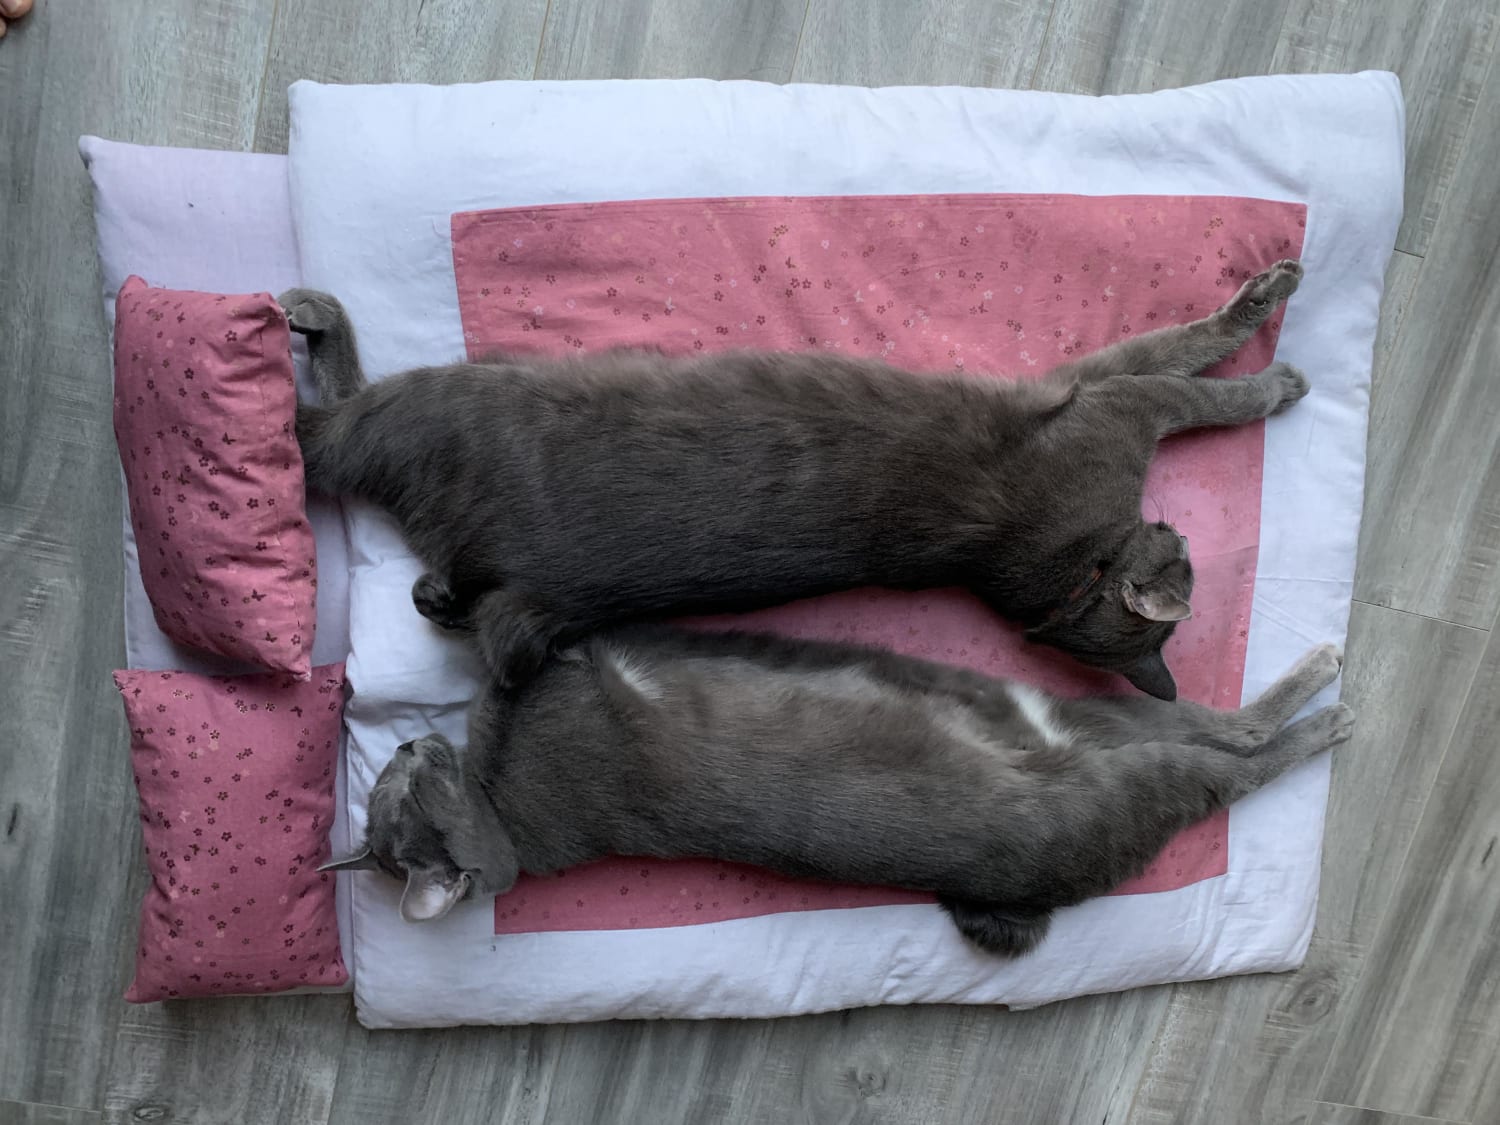 I made a futon (Japanese styled bed) for my kittens. They like sleeping on top of the cover, but what they like even more is to chew on the pillows!